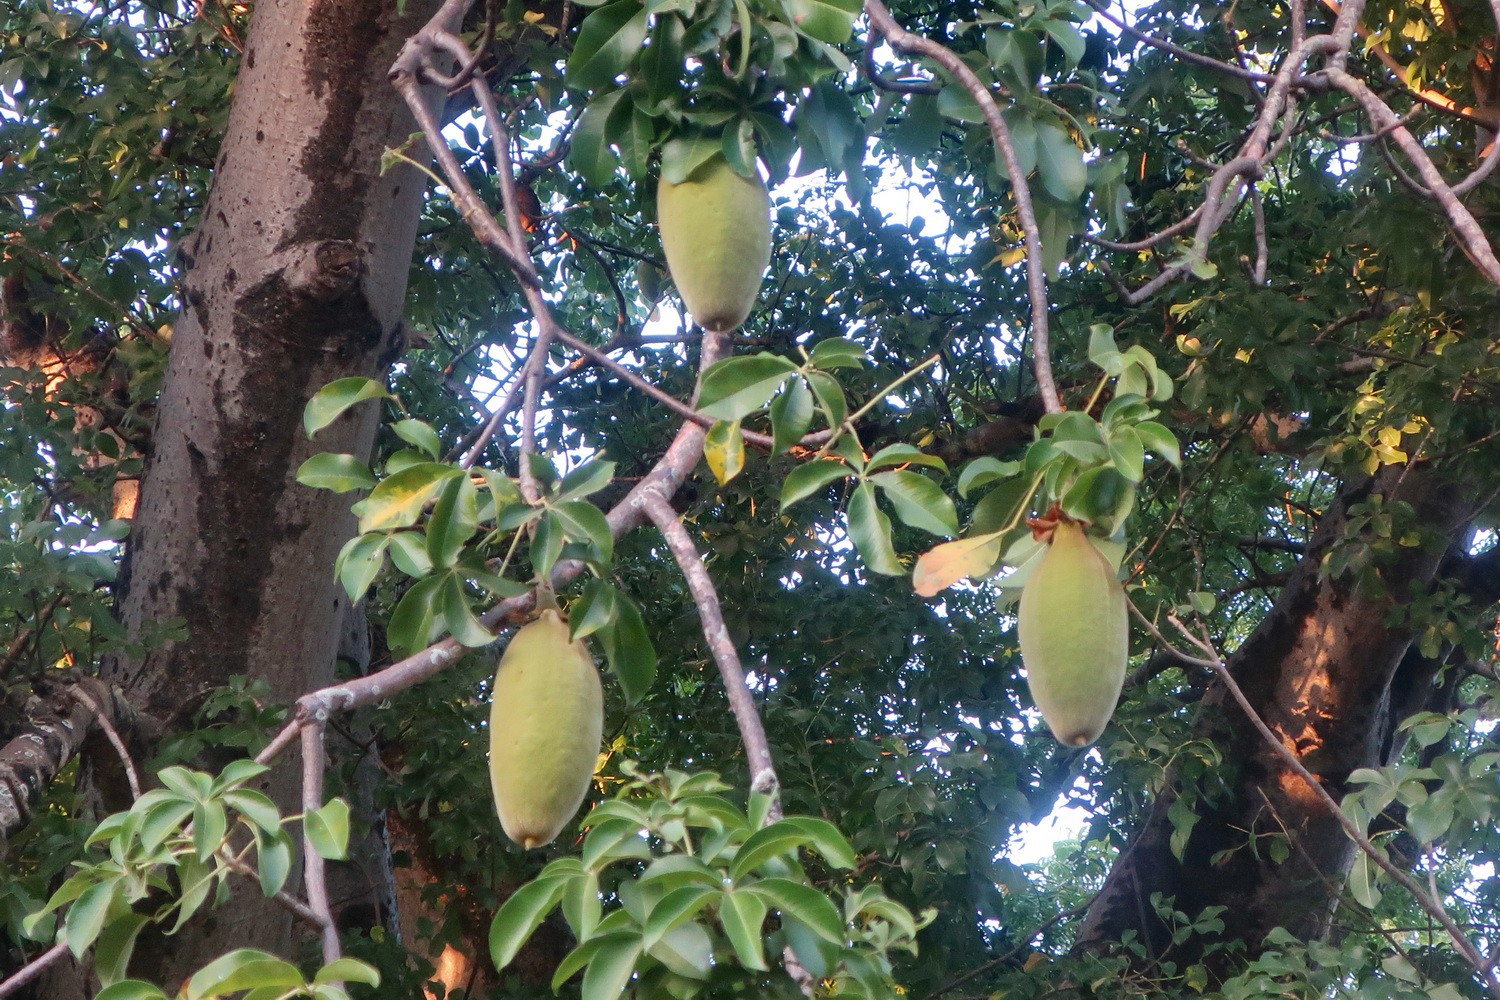 Fruits of the tree